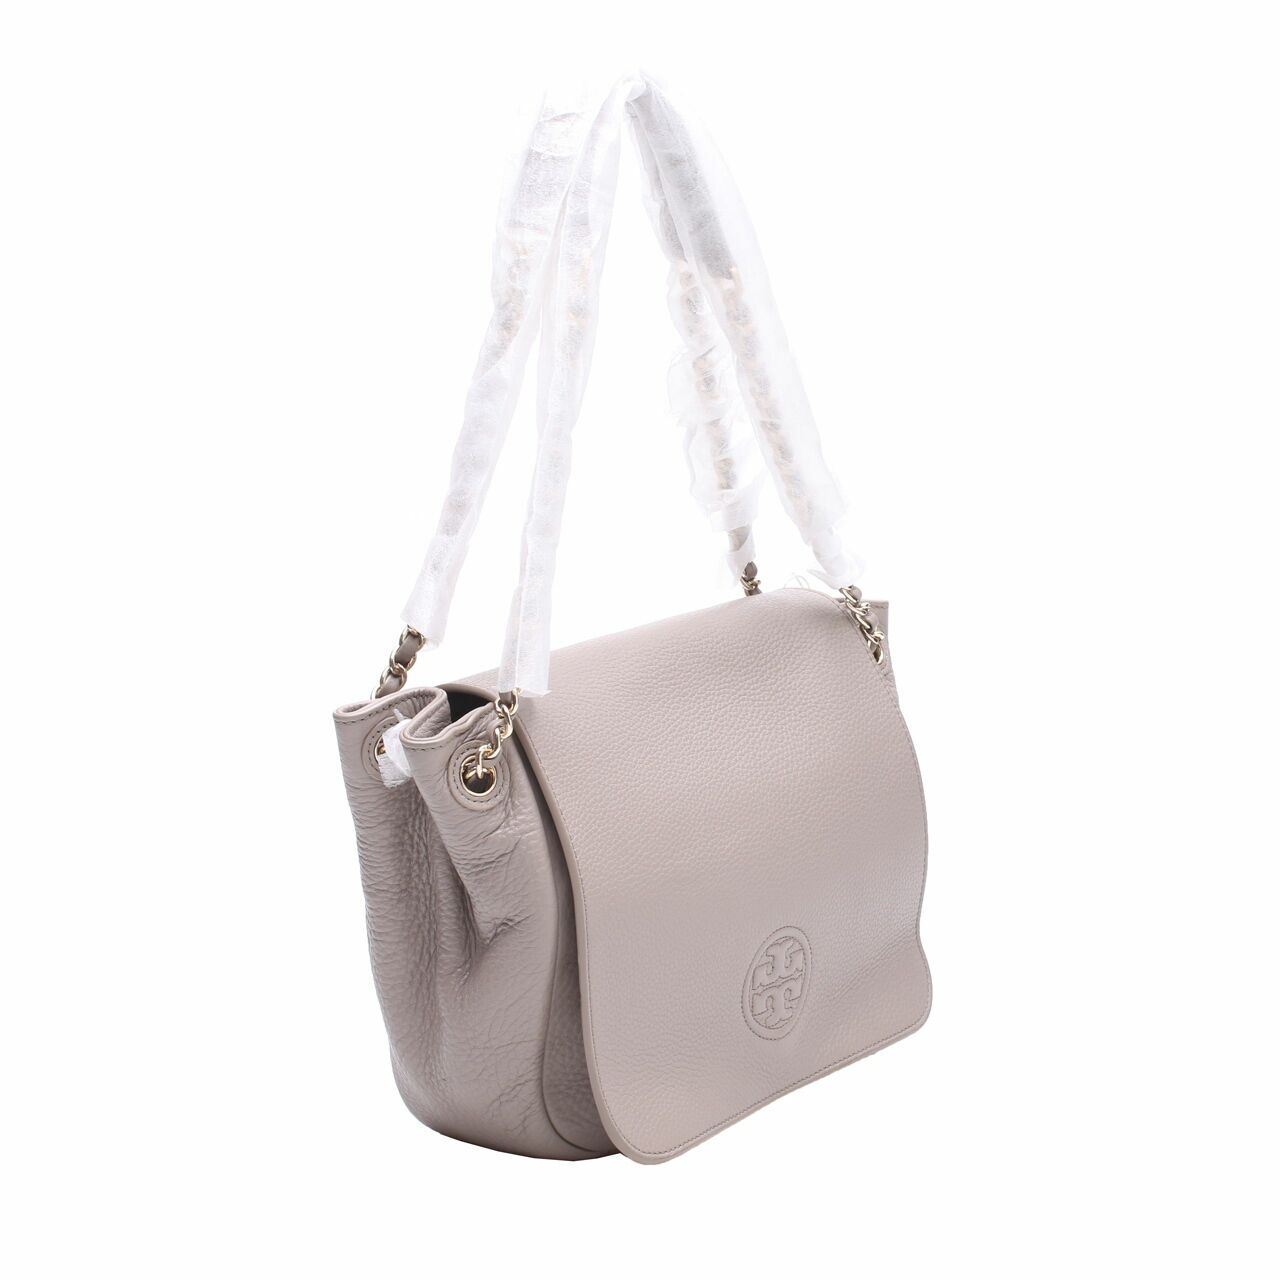 Tory Burch Bombe Small Flap French Gray Shoulder Bag